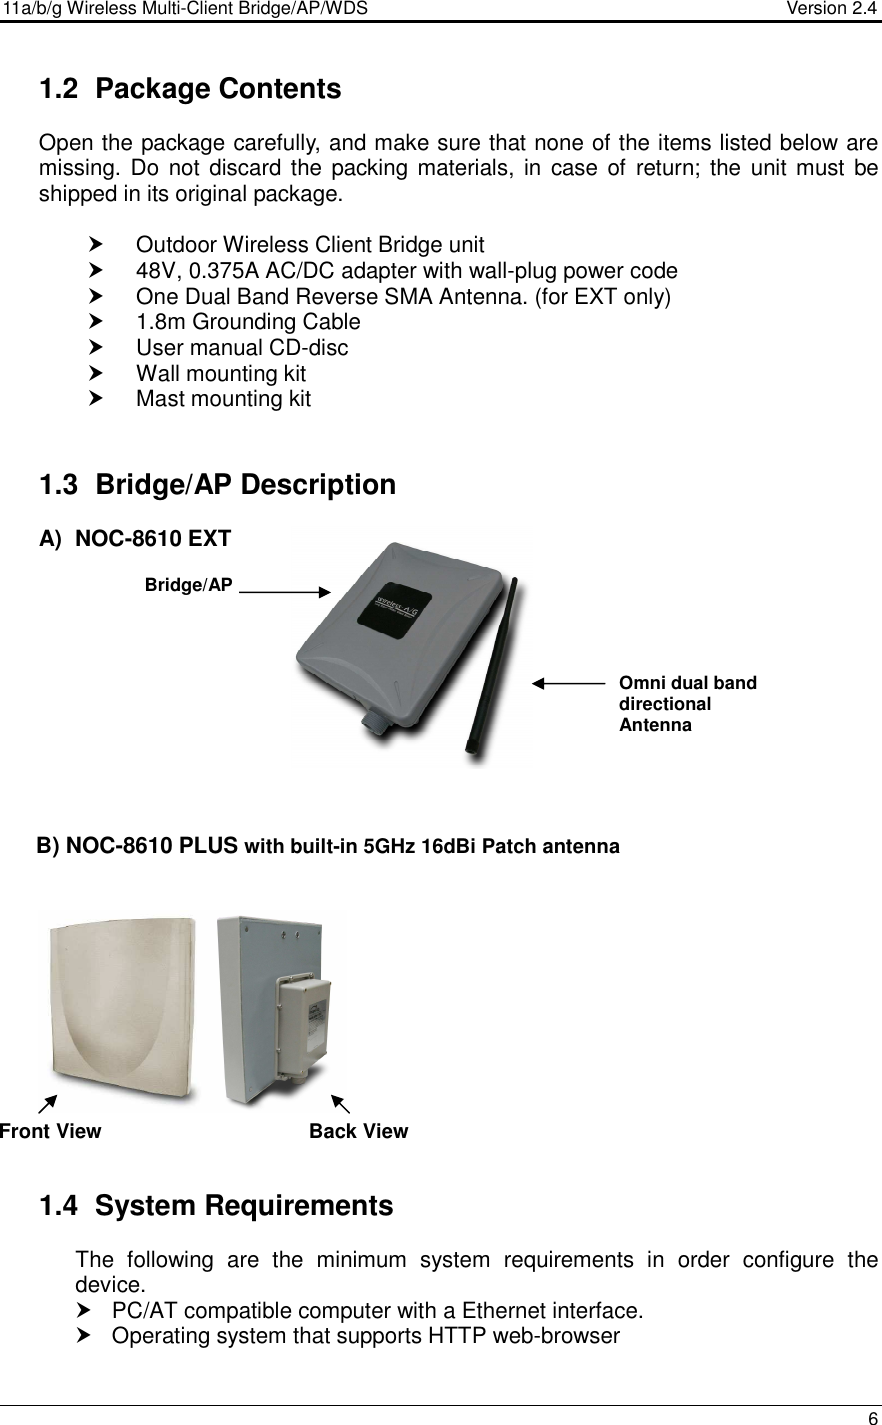 11a/b/g Wireless Multi-Client Bridge/AP/WDS                                  Version 2.4    6  1.2  Package Contents Open the package carefully, and make sure that none of the items listed below are missing. Do not discard  the  packing materials, in  case  of  return; the unit must  be shipped in its original package.    Outdoor Wireless Client Bridge unit   48V, 0.375A AC/DC adapter with wall-plug power code   One Dual Band Reverse SMA Antenna. (for EXT only)   1.8m Grounding Cable   User manual CD-disc   Wall mounting kit   Mast mounting kit  1.3  Bridge/AP Description A)  NOC-8610 EXT             B) NOC-8610 PLUS with built-in 5GHz 16dBi Patch antenna       1.4  System Requirements The  following  are  the  minimum  system  requirements  in  order  configure  the device.    PC/AT compatible computer with a Ethernet interface.   Operating system that supports HTTP web-browser  Bridge/AP Omni dual band directional Antenna Front View  Back View  